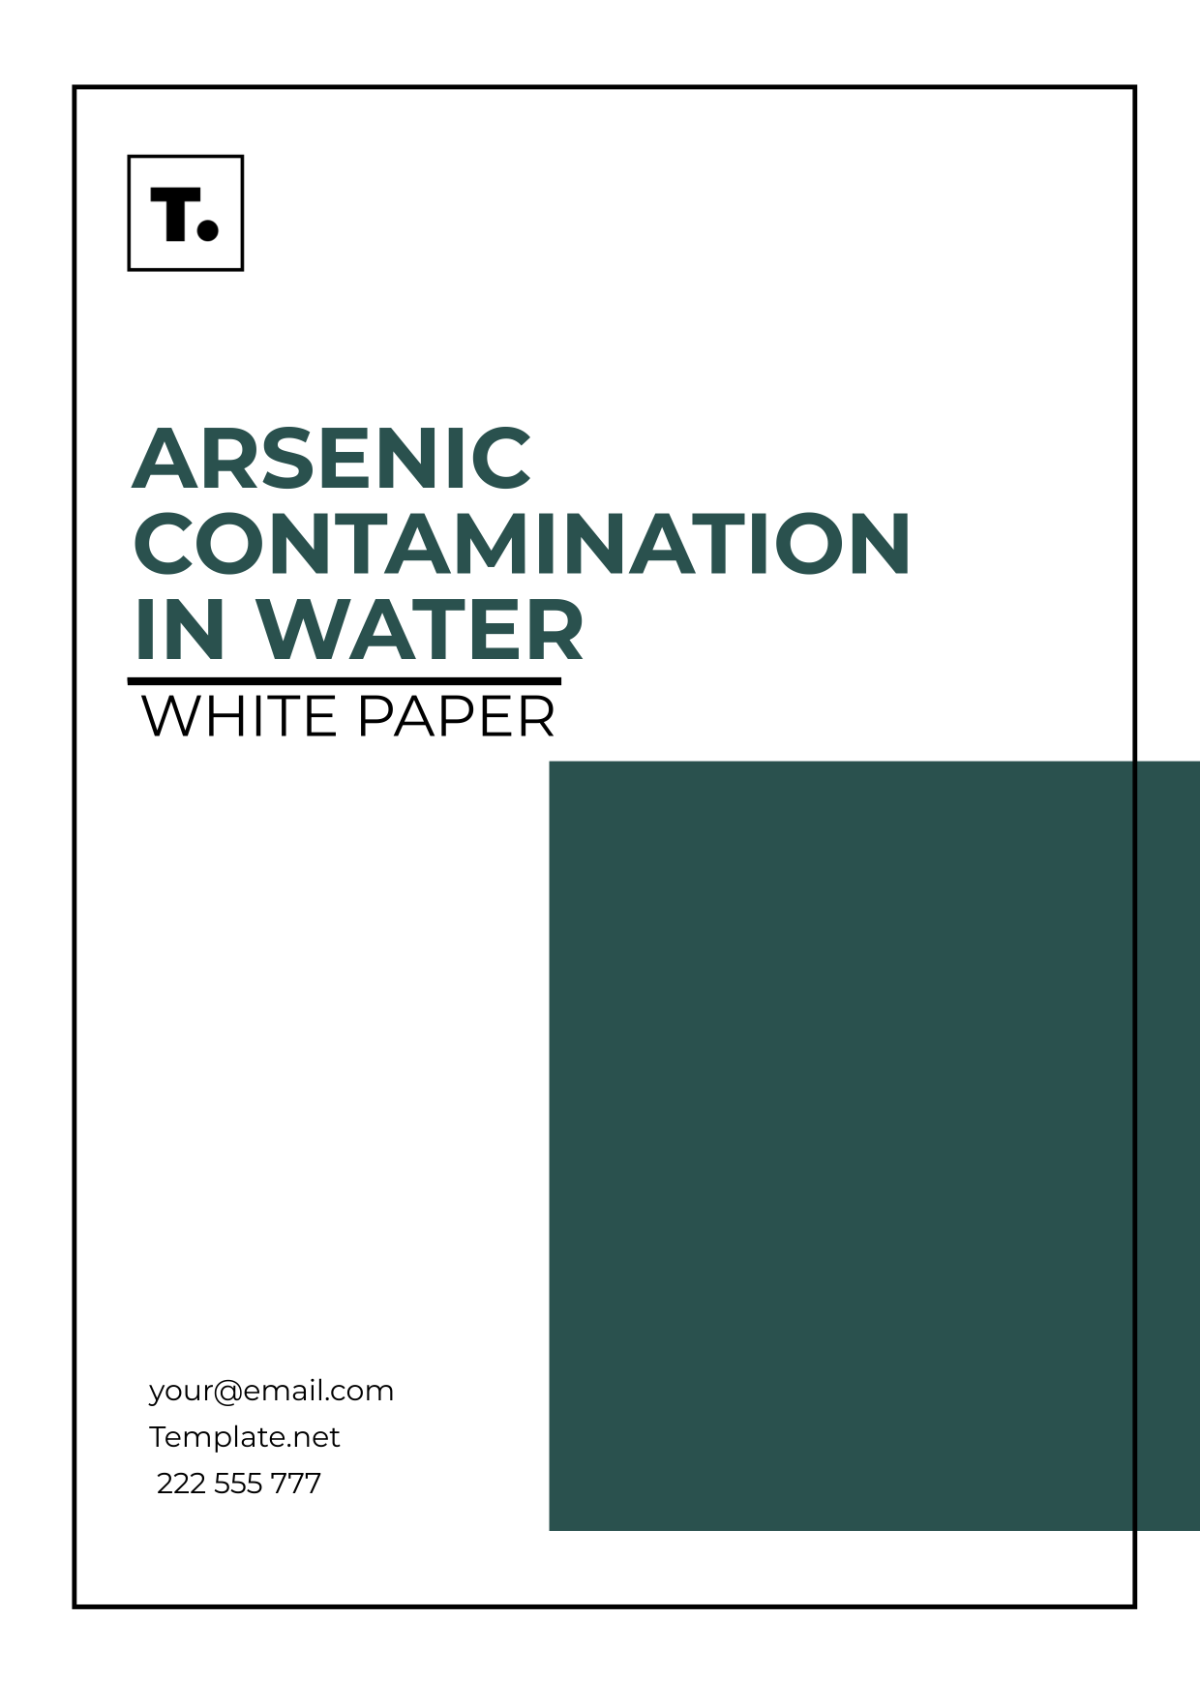 Arsenic Contamination In Water White Paper Template